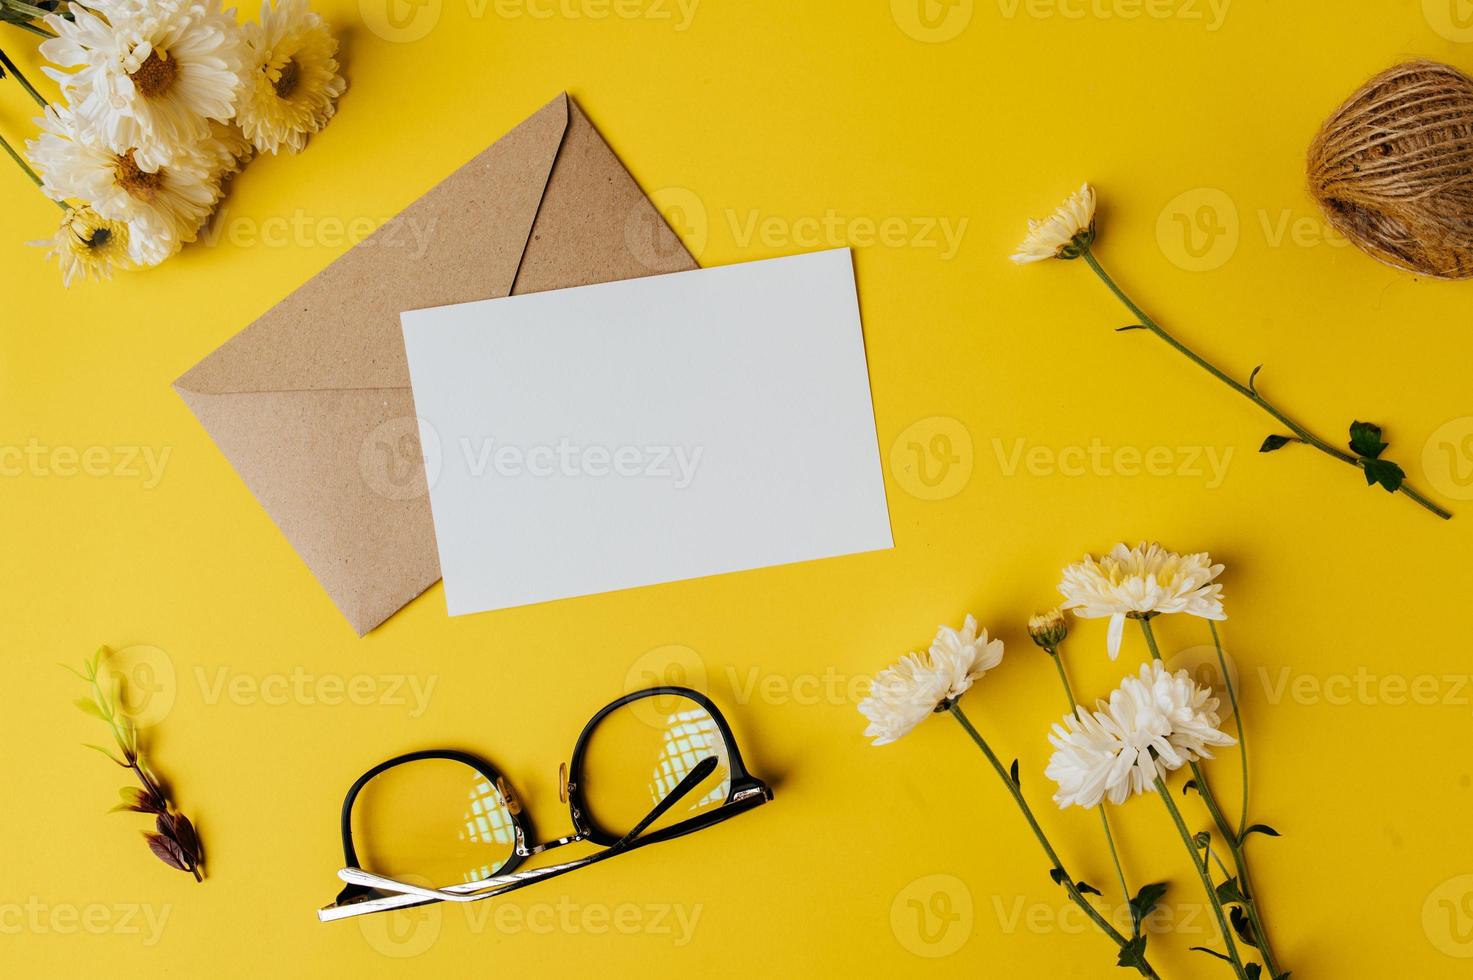 brown envelope and card on yellow background decorated with flowers photo